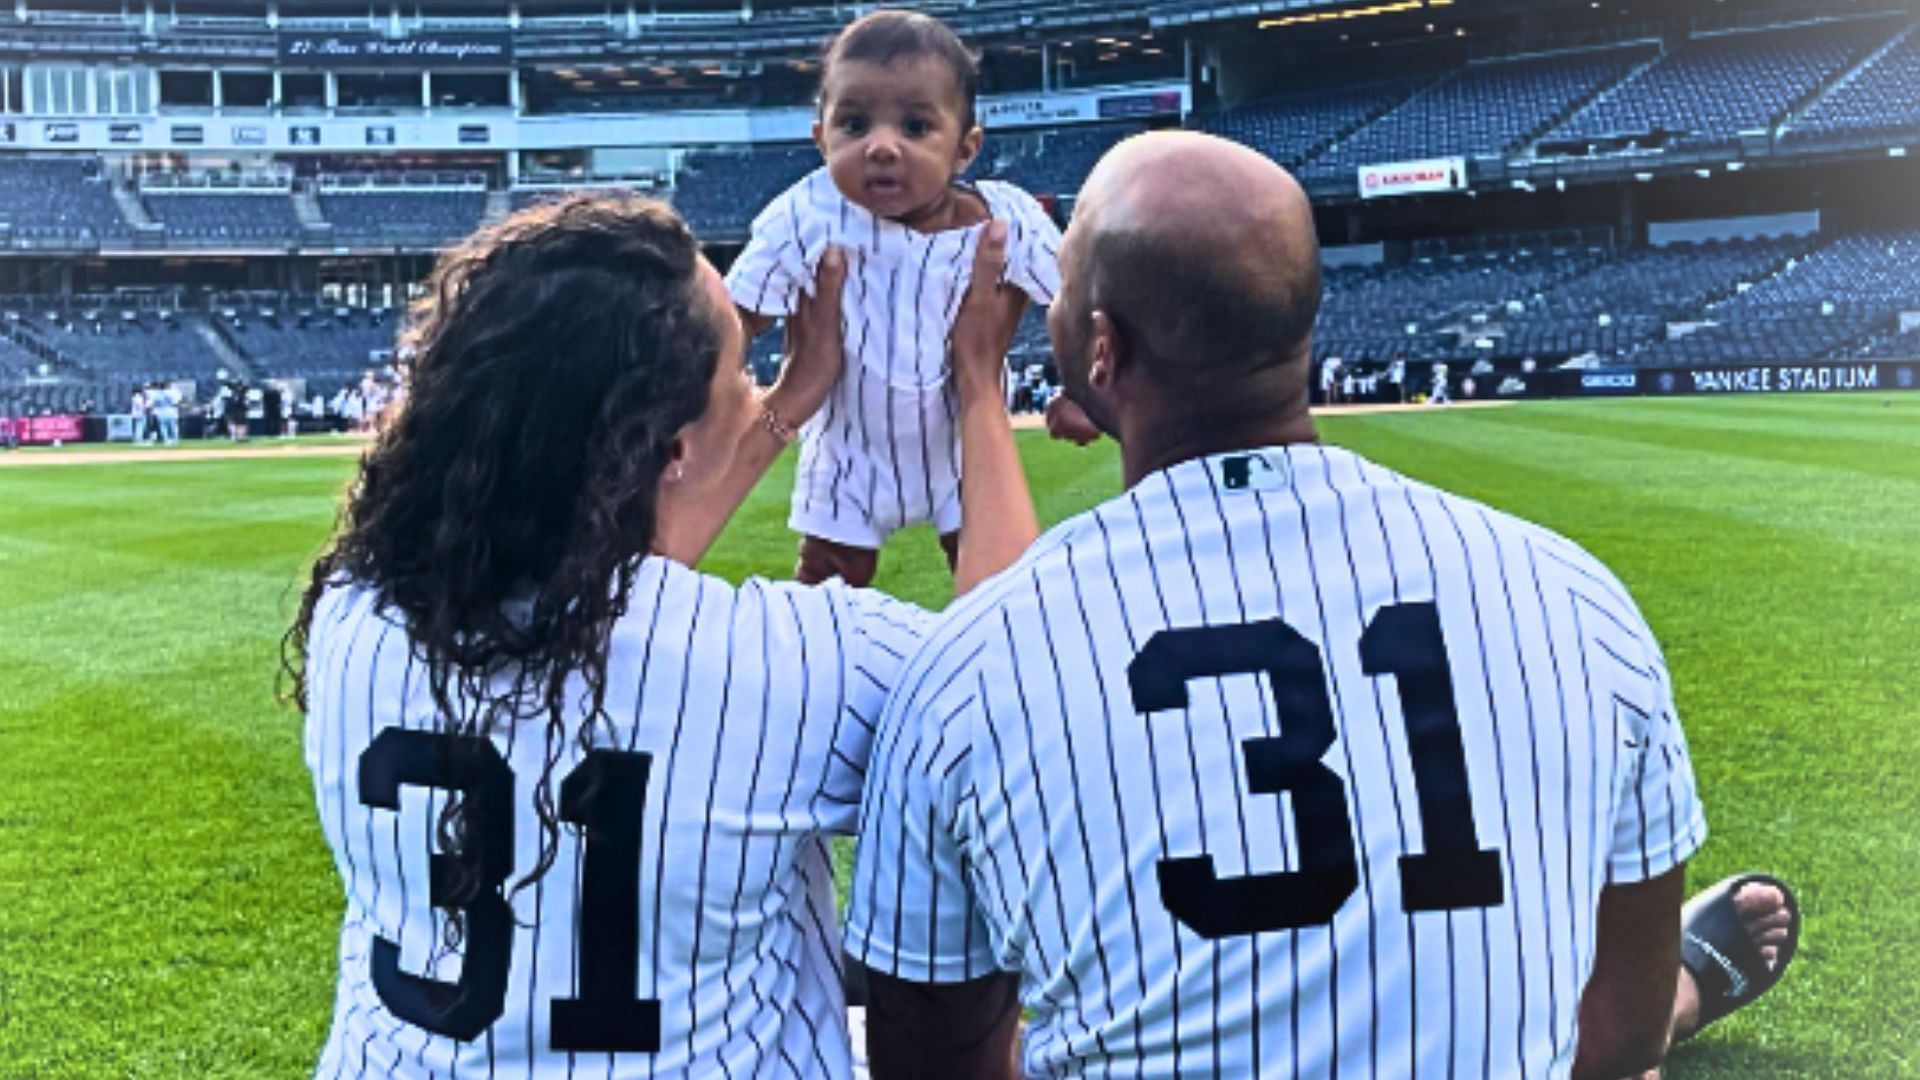 Aaron Hicks and Cheyenne Woods welcome baby boy in first photo